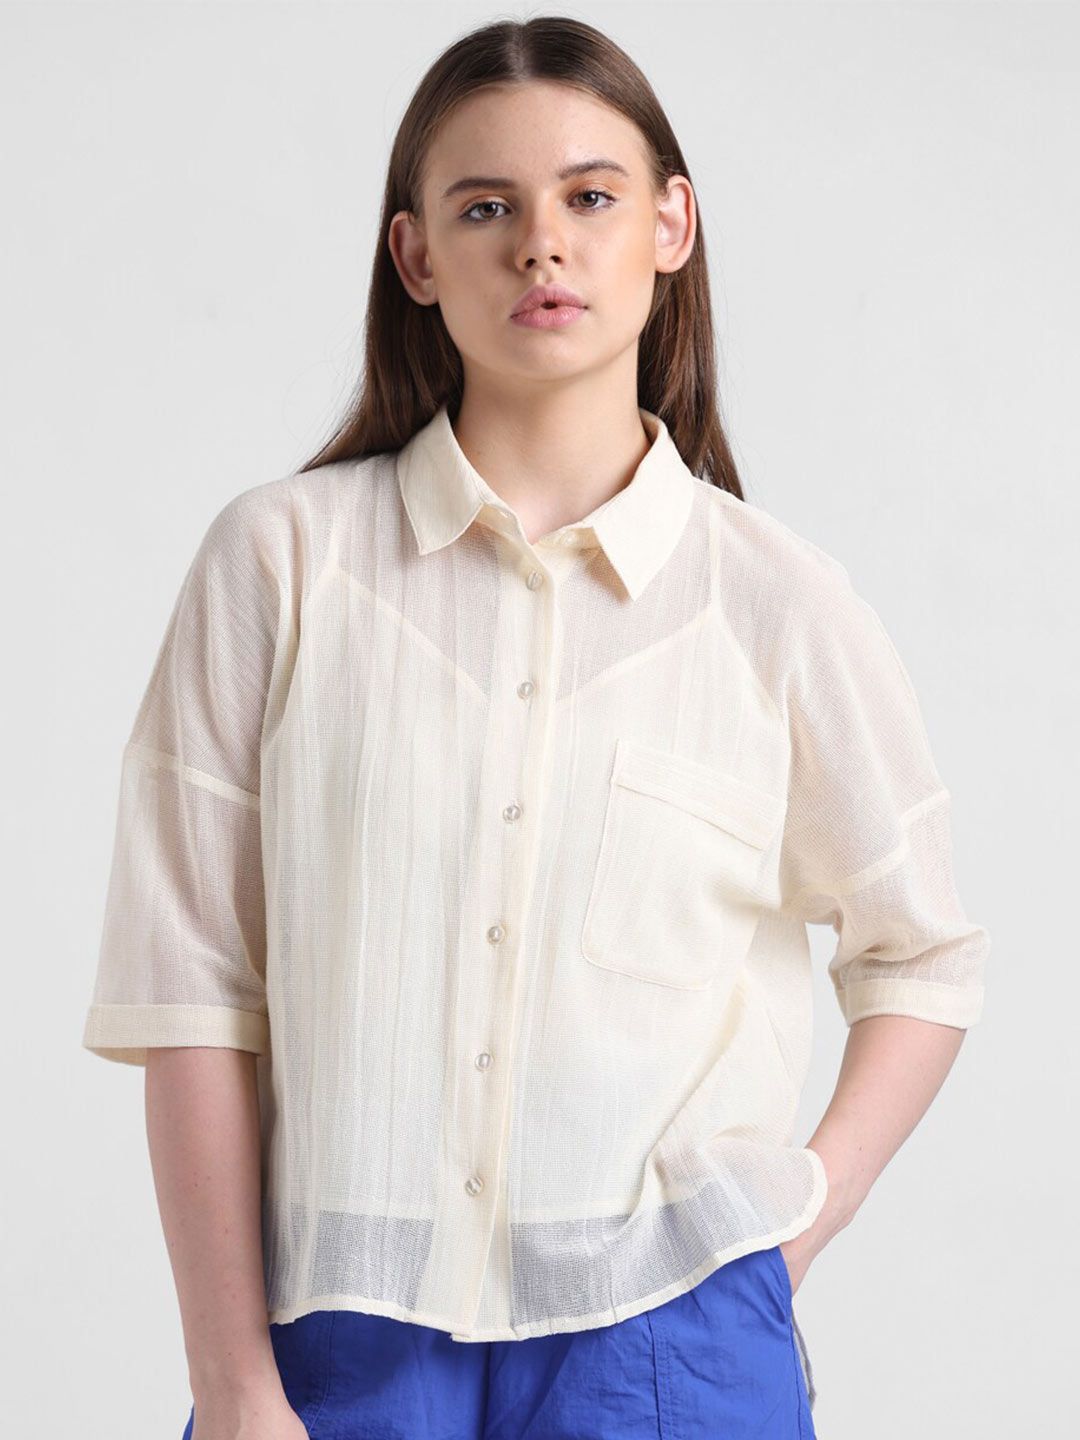 ONLY New Spread Collar Semi Sheer Casual Shirt Price in India